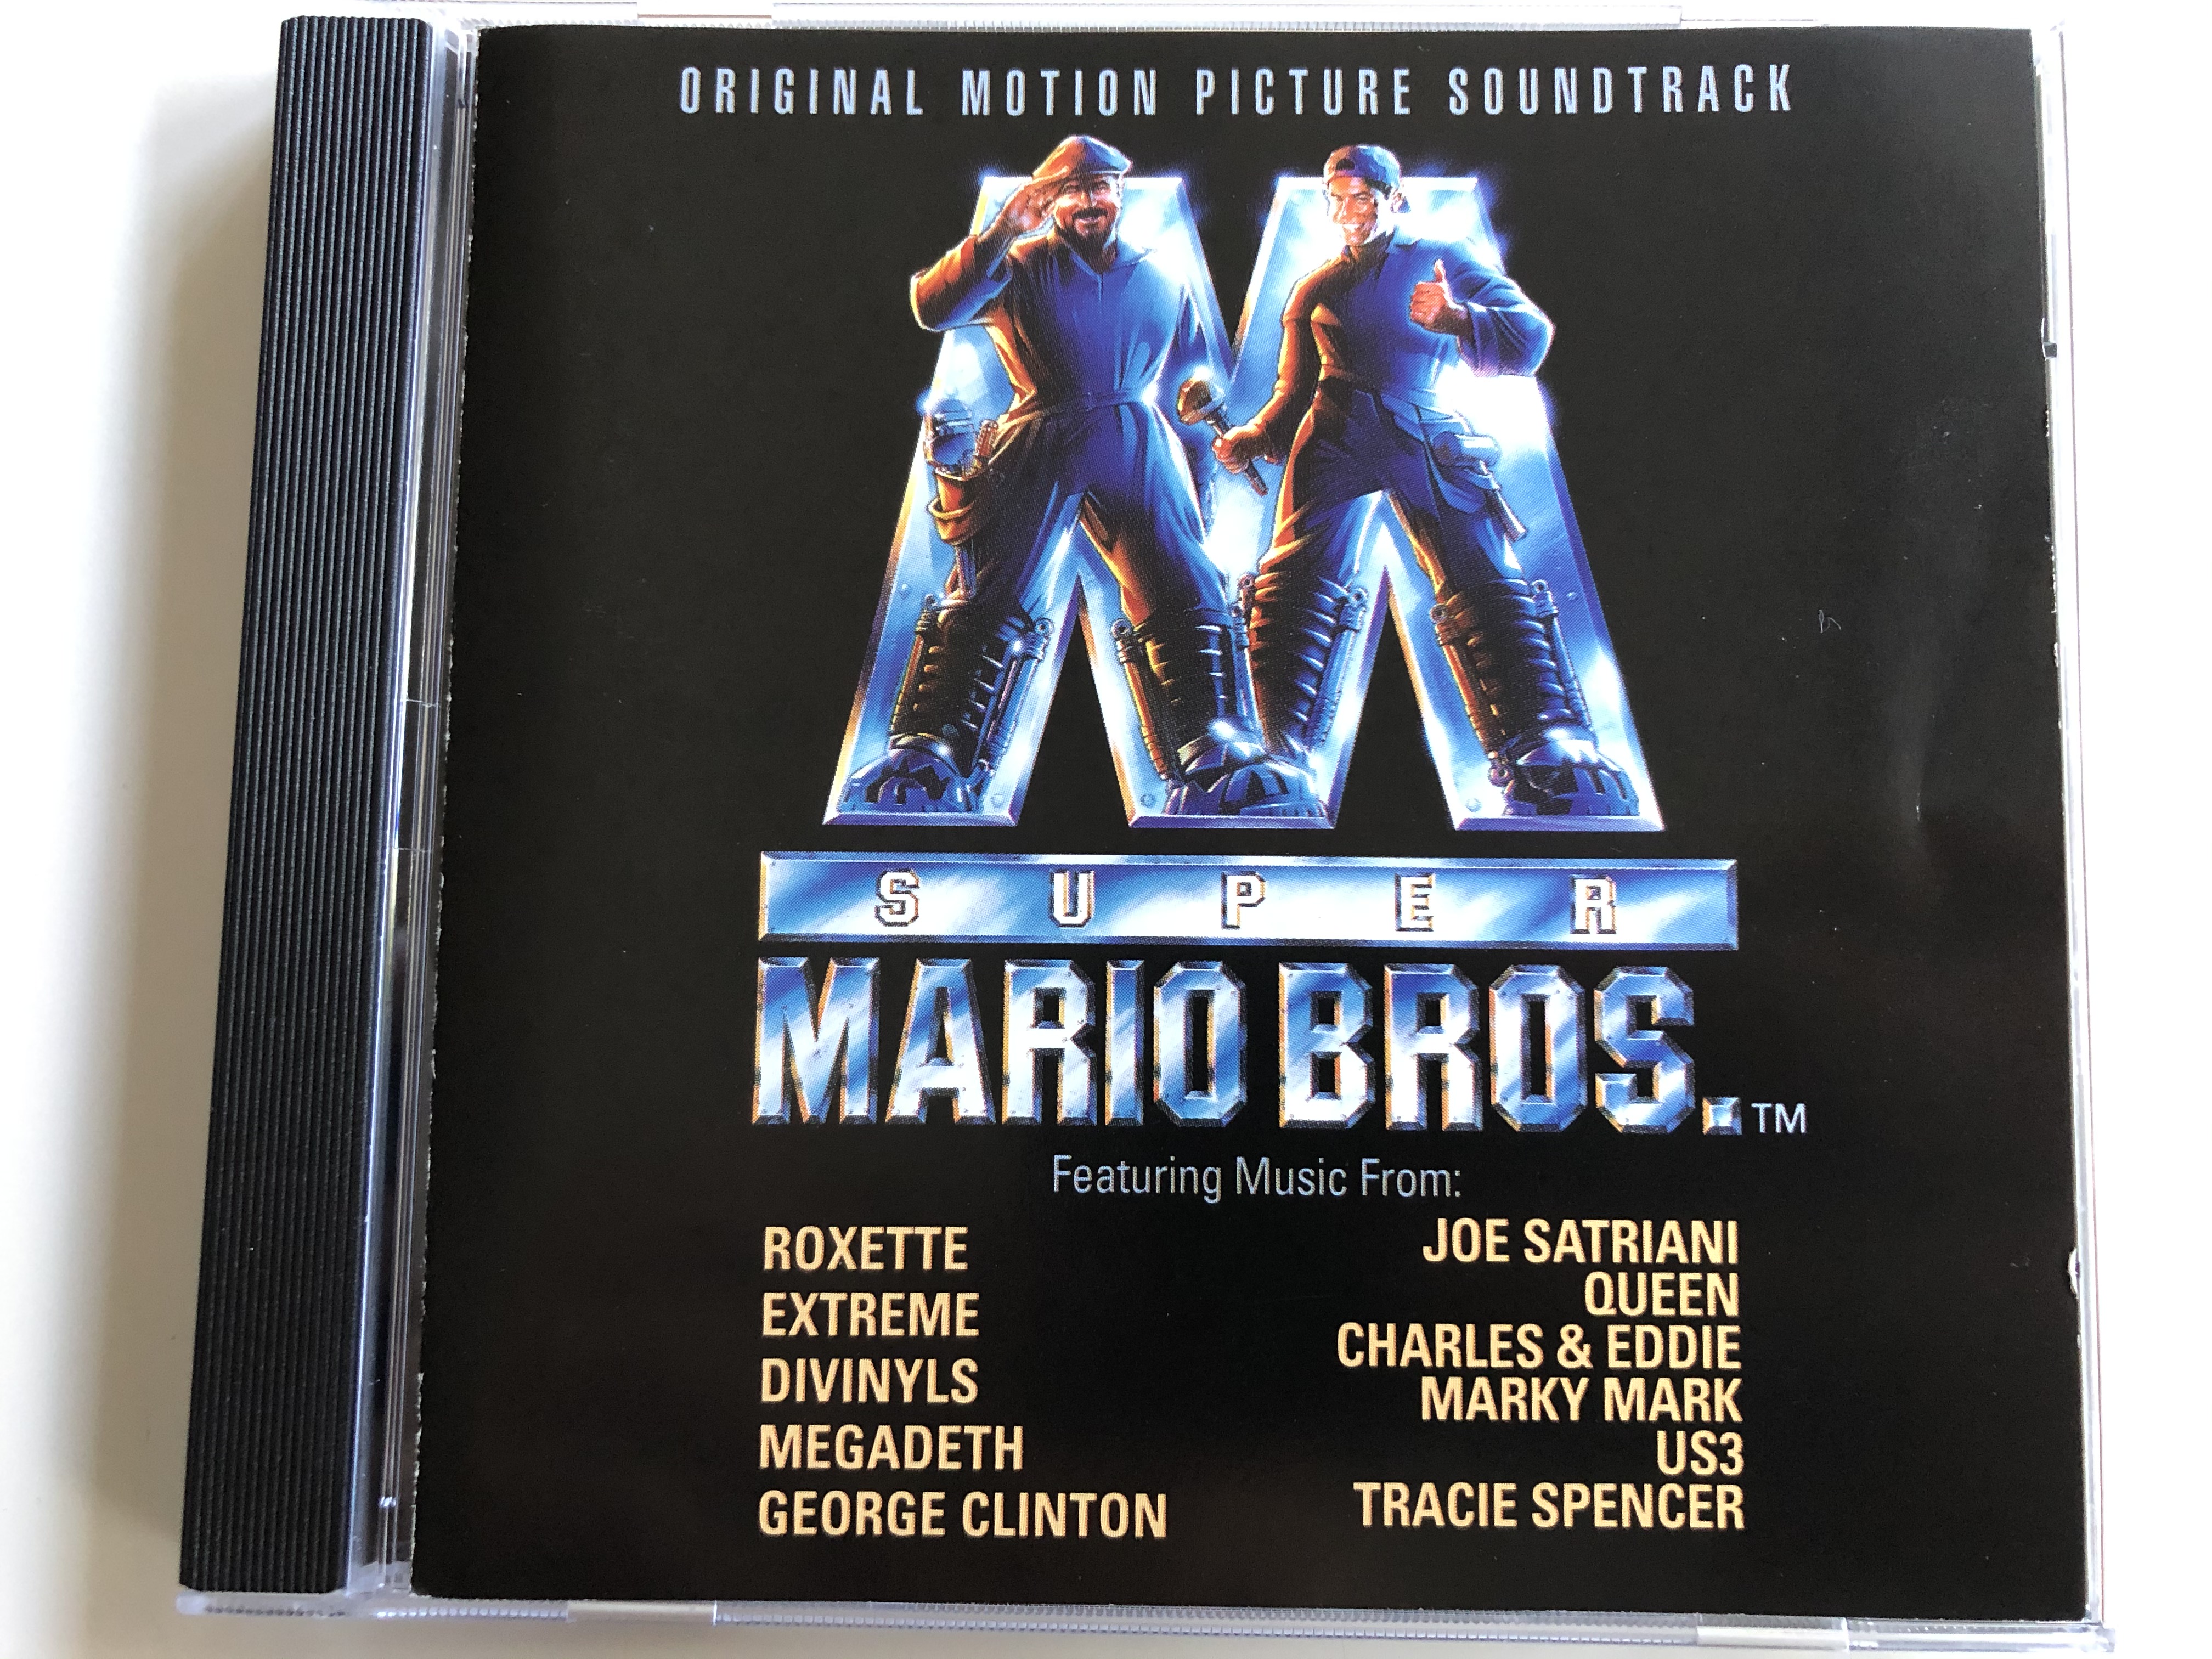 original-motion-picture-soundtrack-super-mario-bros.-featuring-music-from-roxette-extreme-divinlyls-megadeth-george-clinton-joe-satriani-queen-charles-eddie-marky-mark-us3-tracie-sp-1-.jpg